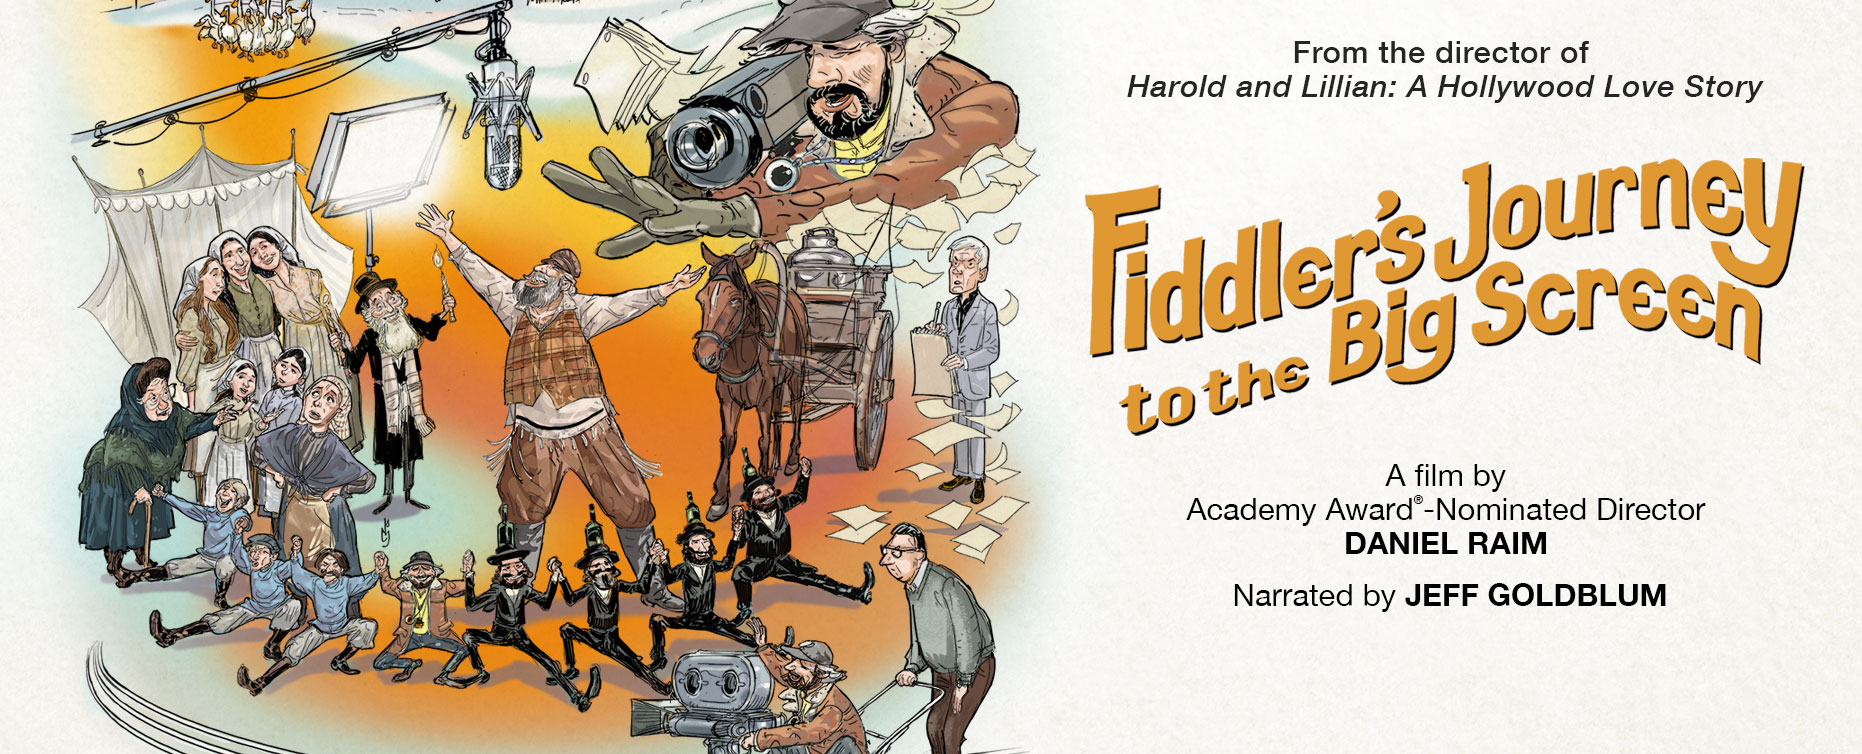 FIDDLER'S JOURNEY TO THE BIG SCREEN